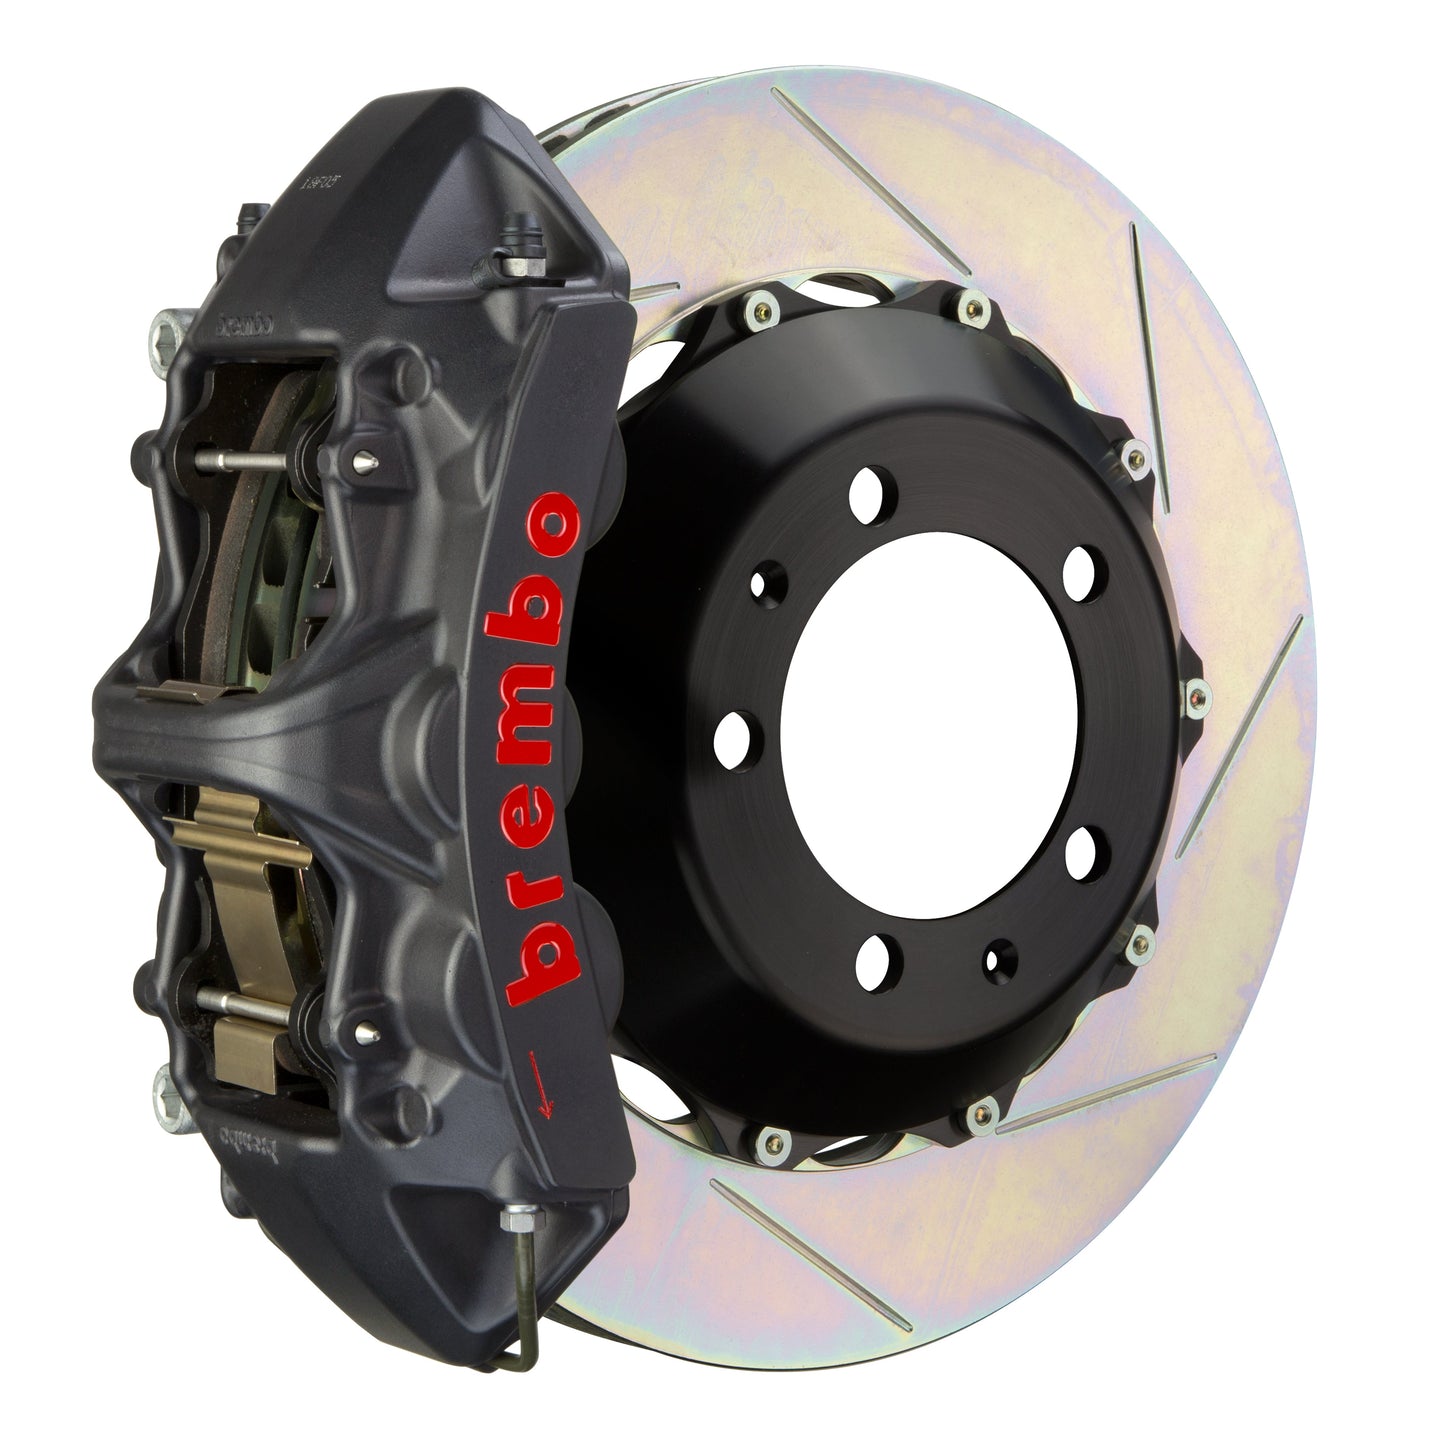 Front Brembo Gran Turismo Braking Upgrade Kit (1M18007AS) GT / S6 Caliper with 6-Pistons & 2-piece 355x32 Disc